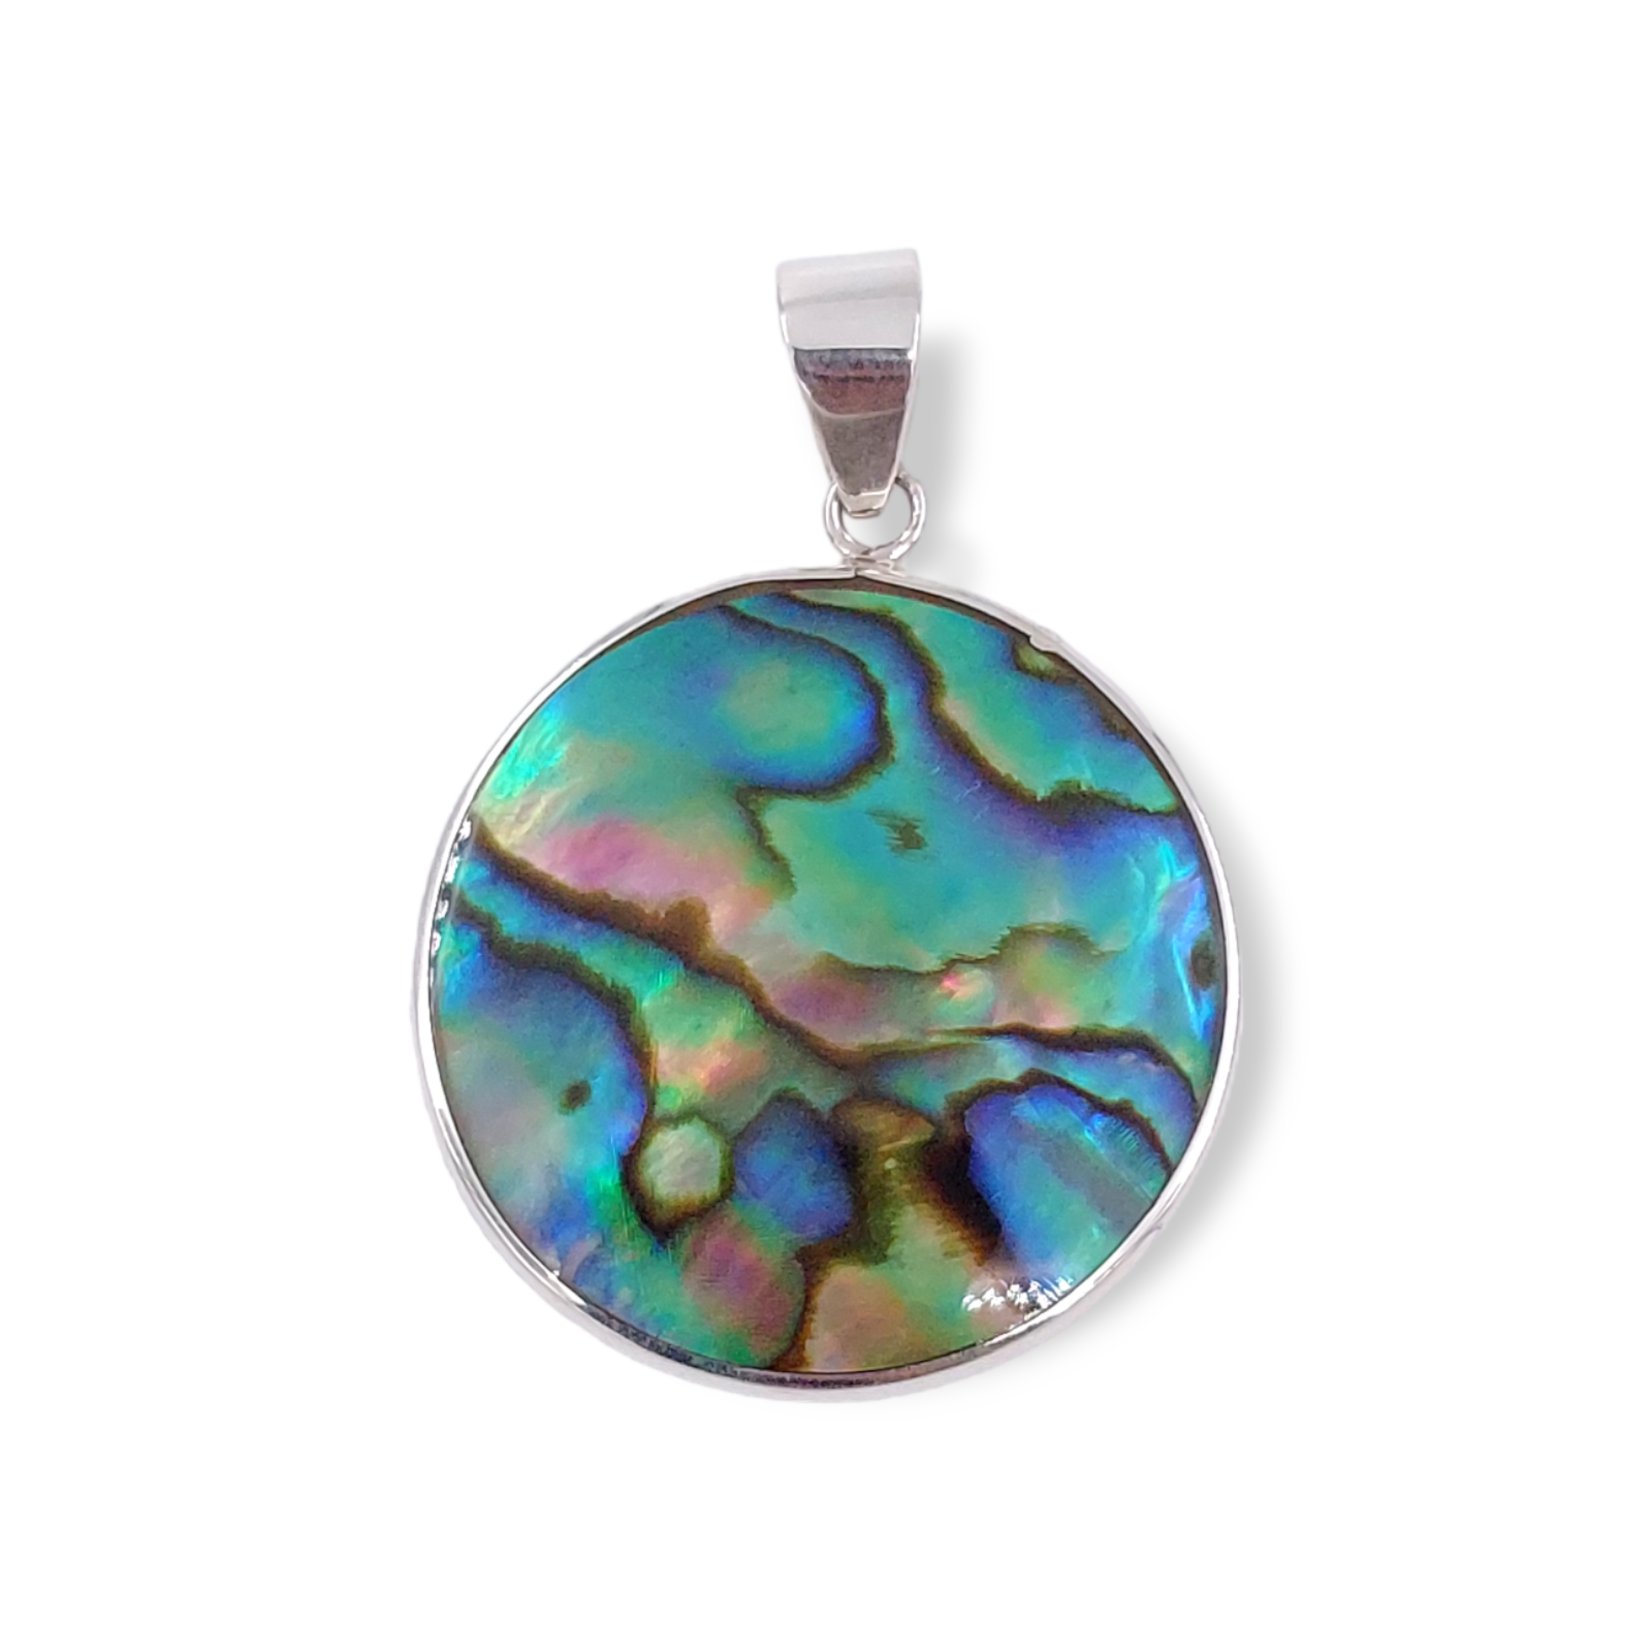 P459 Sterling Silver Reversible Paua Shell and Mother of Pearl Pendant